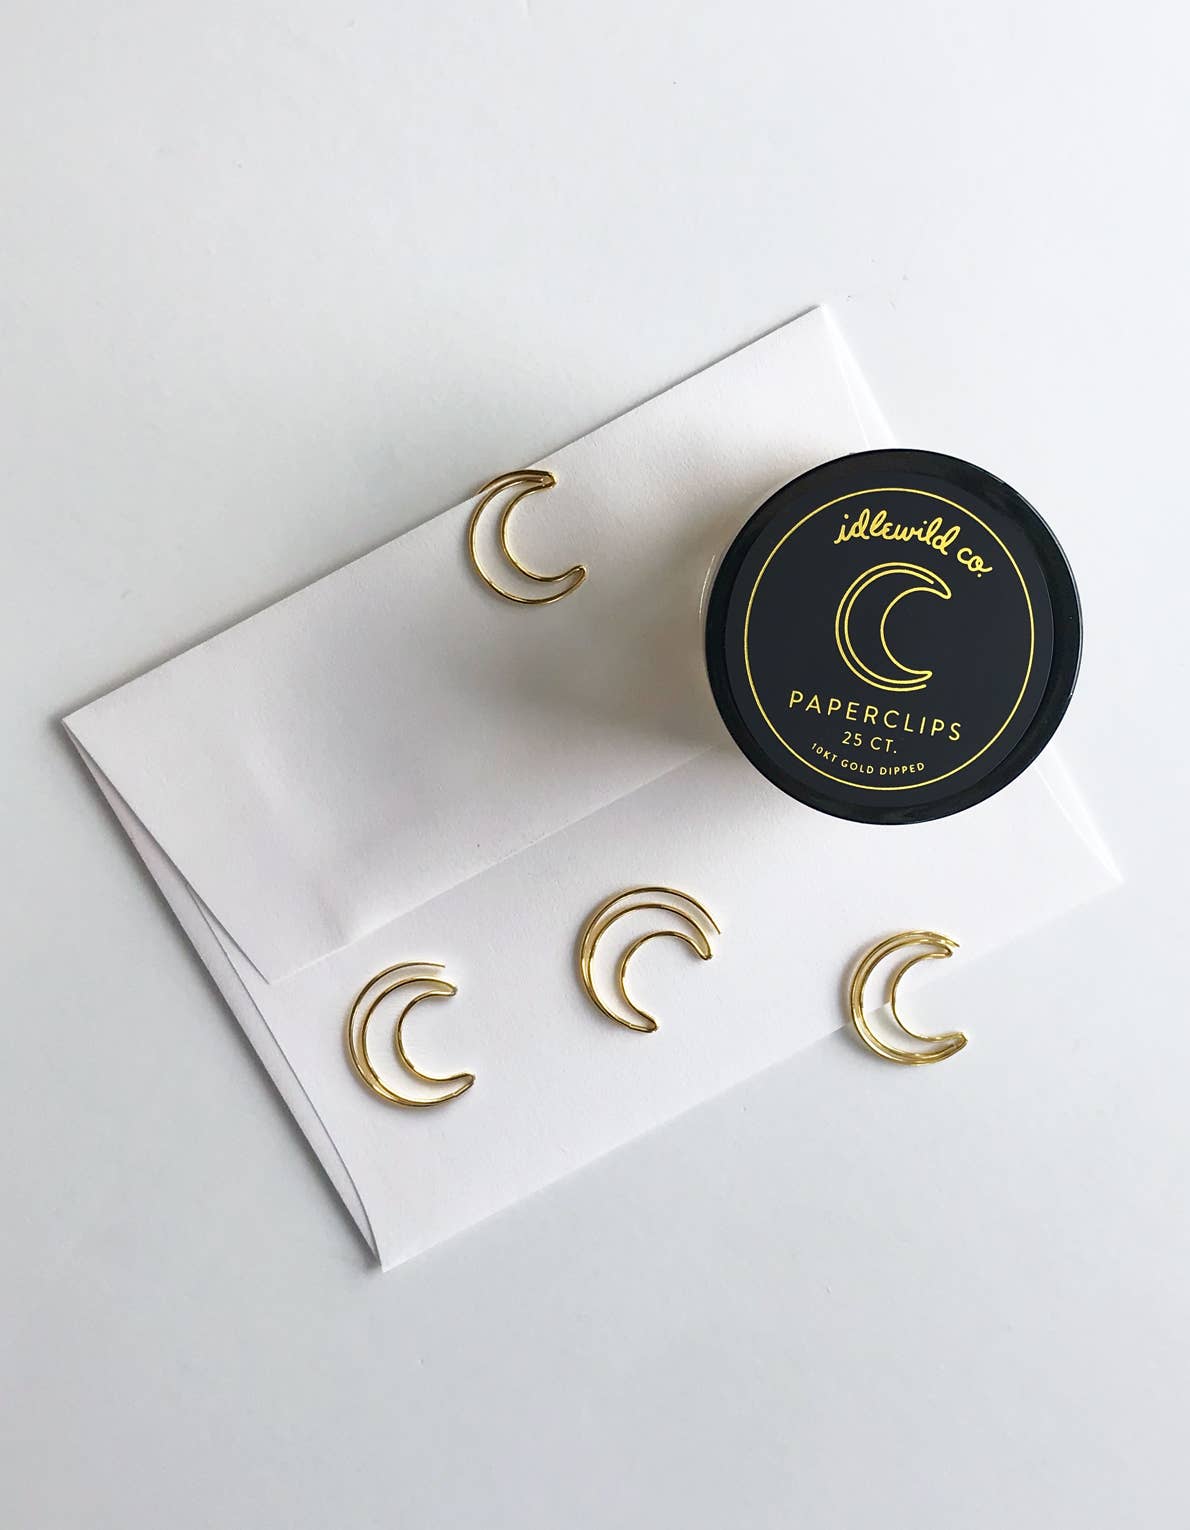 Crescent Moon Paper Clips - Spiral Circle